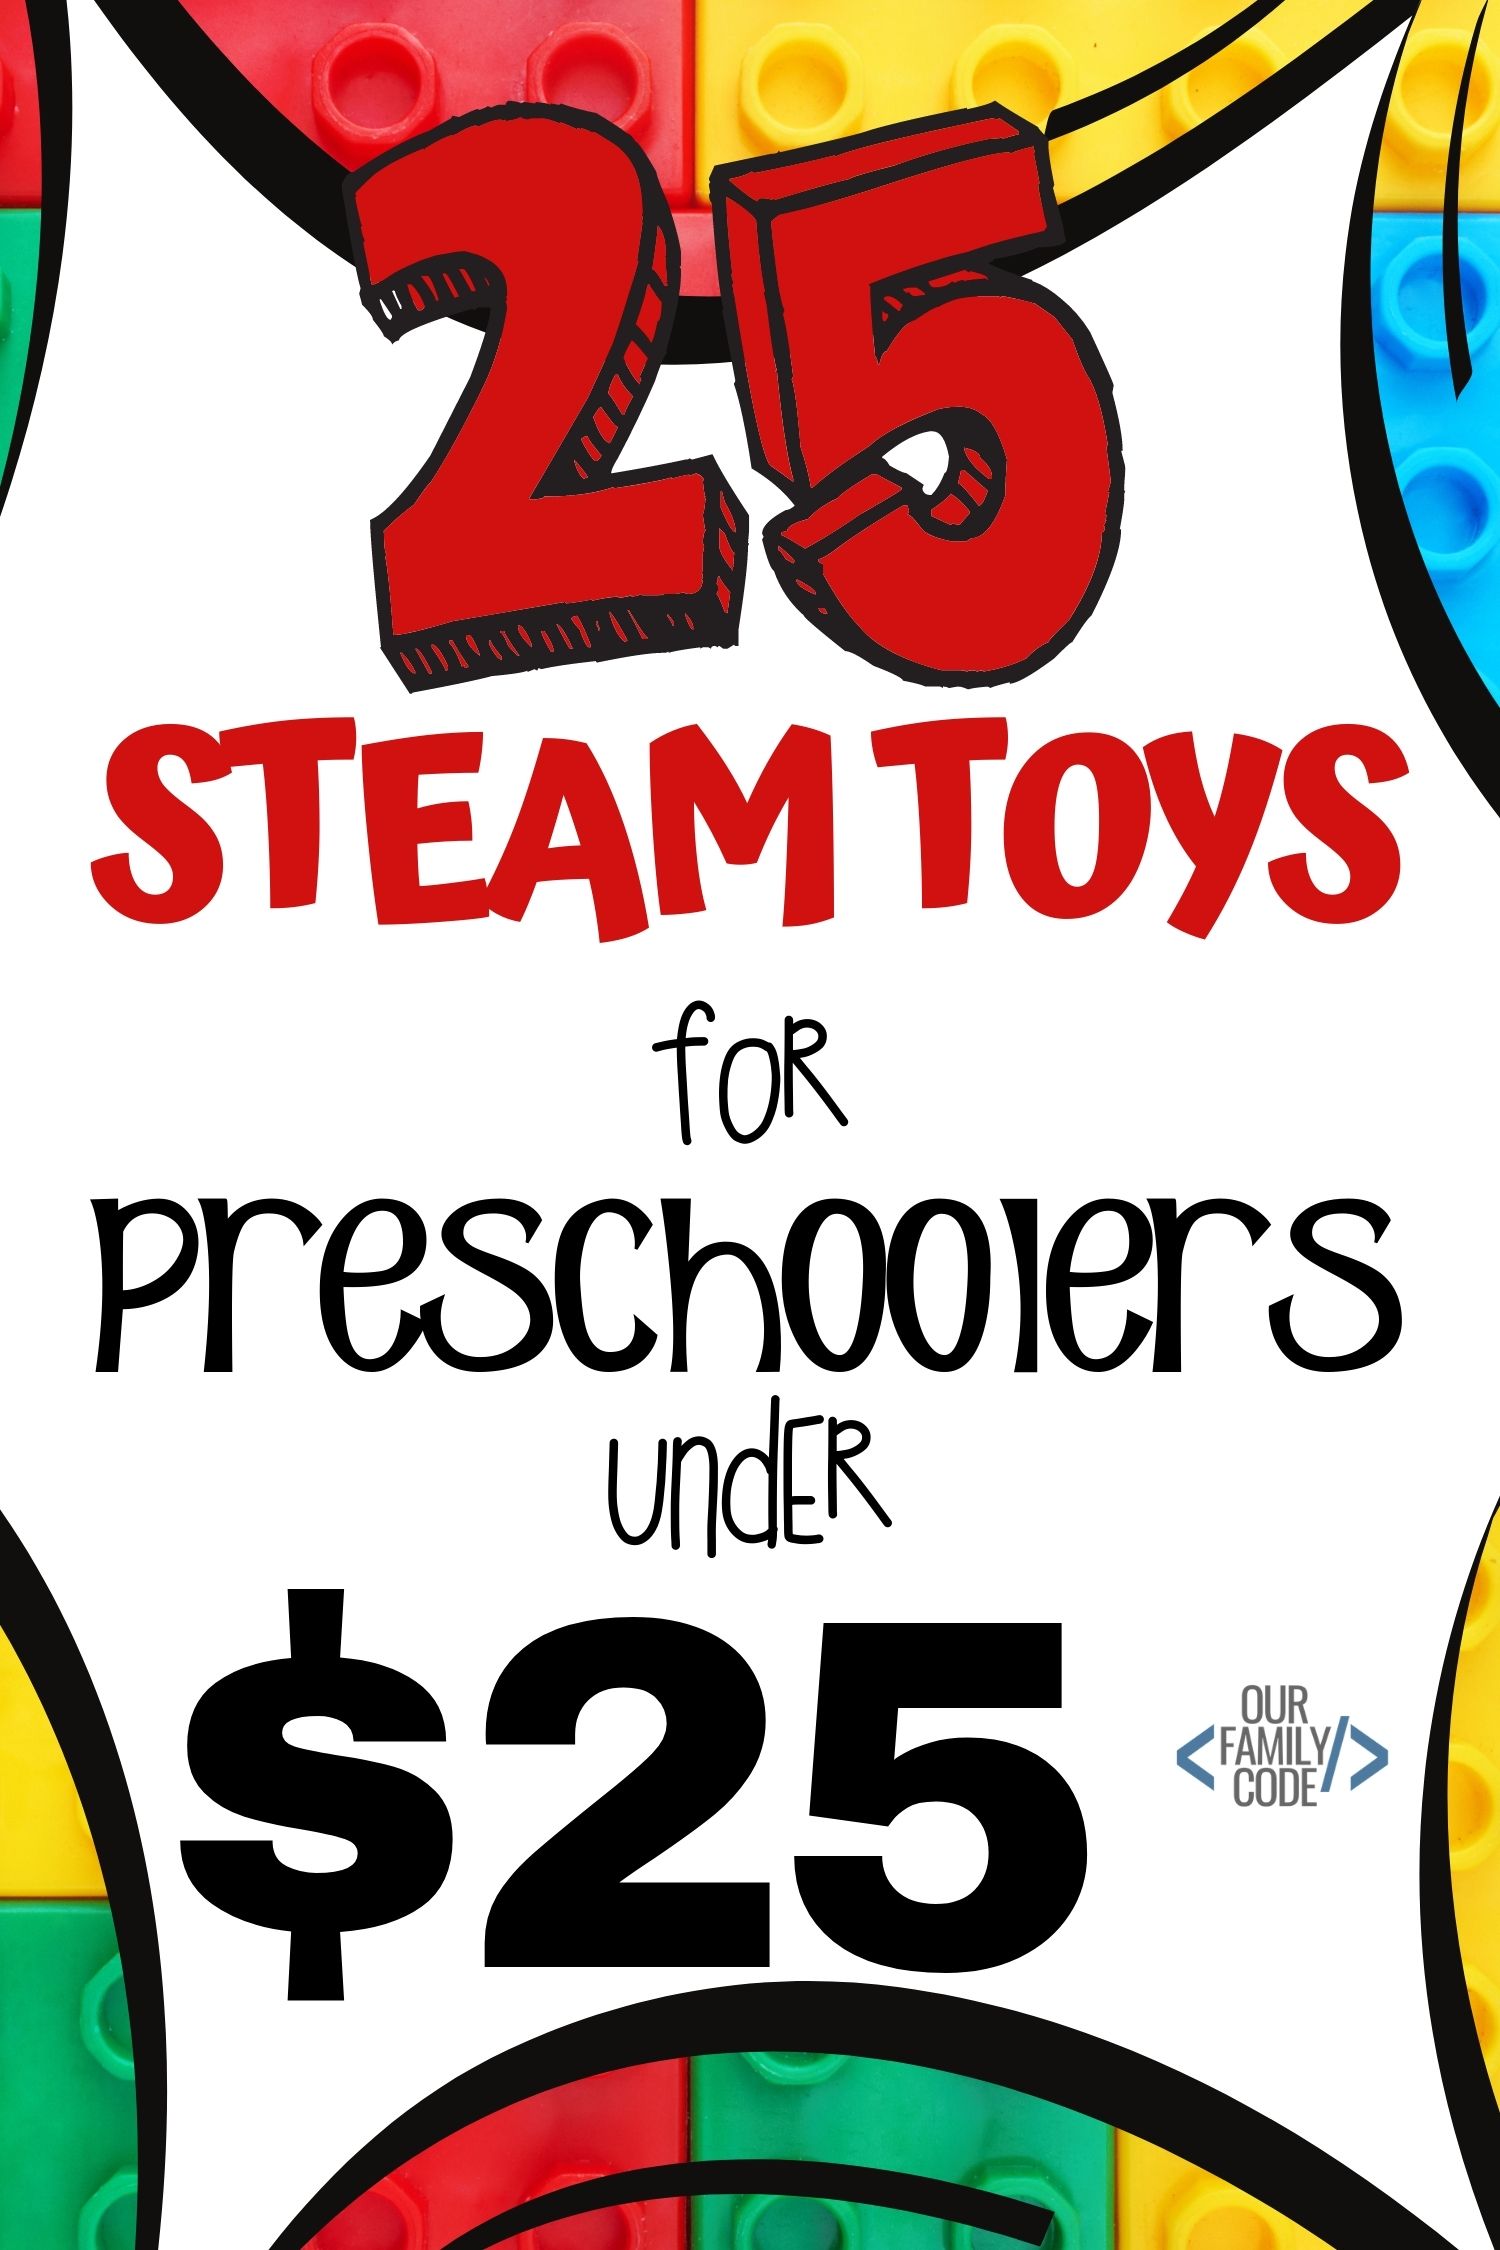 Check out these top STEAM toys for preschoolers under $25 that teach STEAM concepts through play designed for kids 5 and under! #STEAM #giftsforkids #STEAMgifts #preschoolertoys #giftsfortoddlers #giftguide